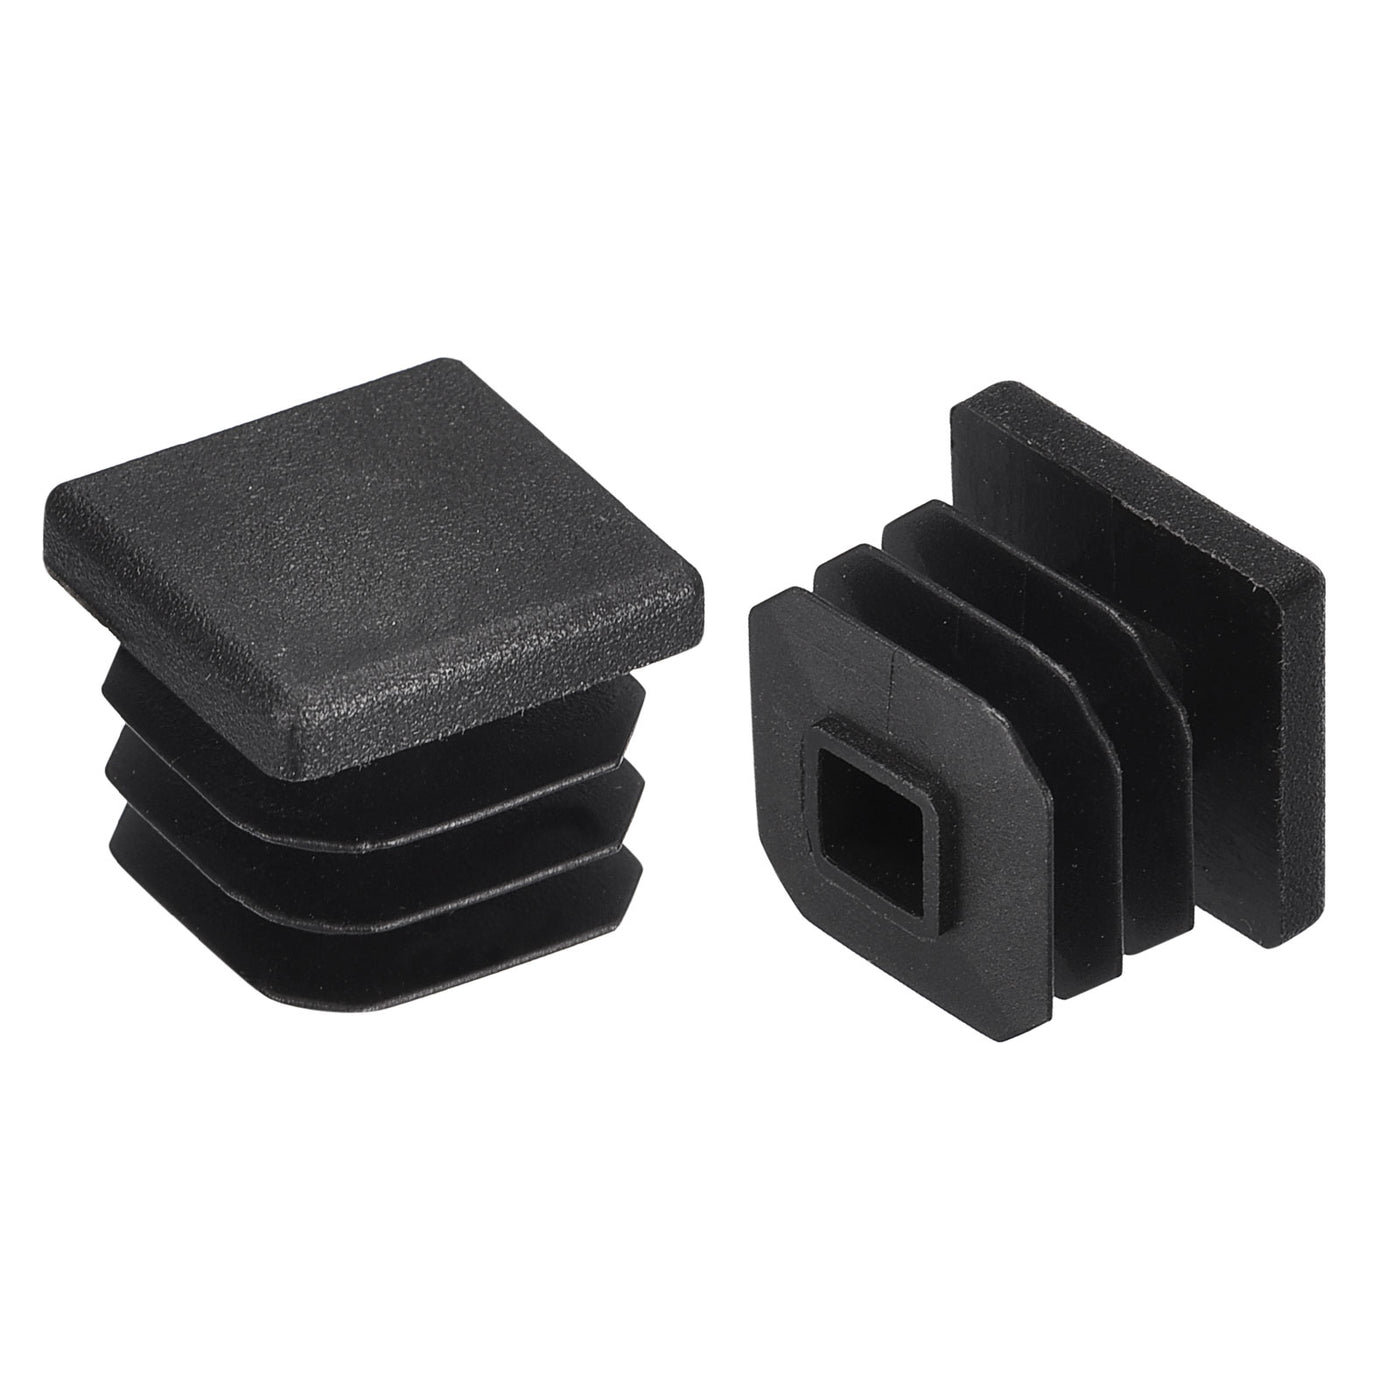 uxcell Uxcell 30Pcs 16mmx16mm(0.63inch) Plastic Tubing Plug Square Post End Caps Black